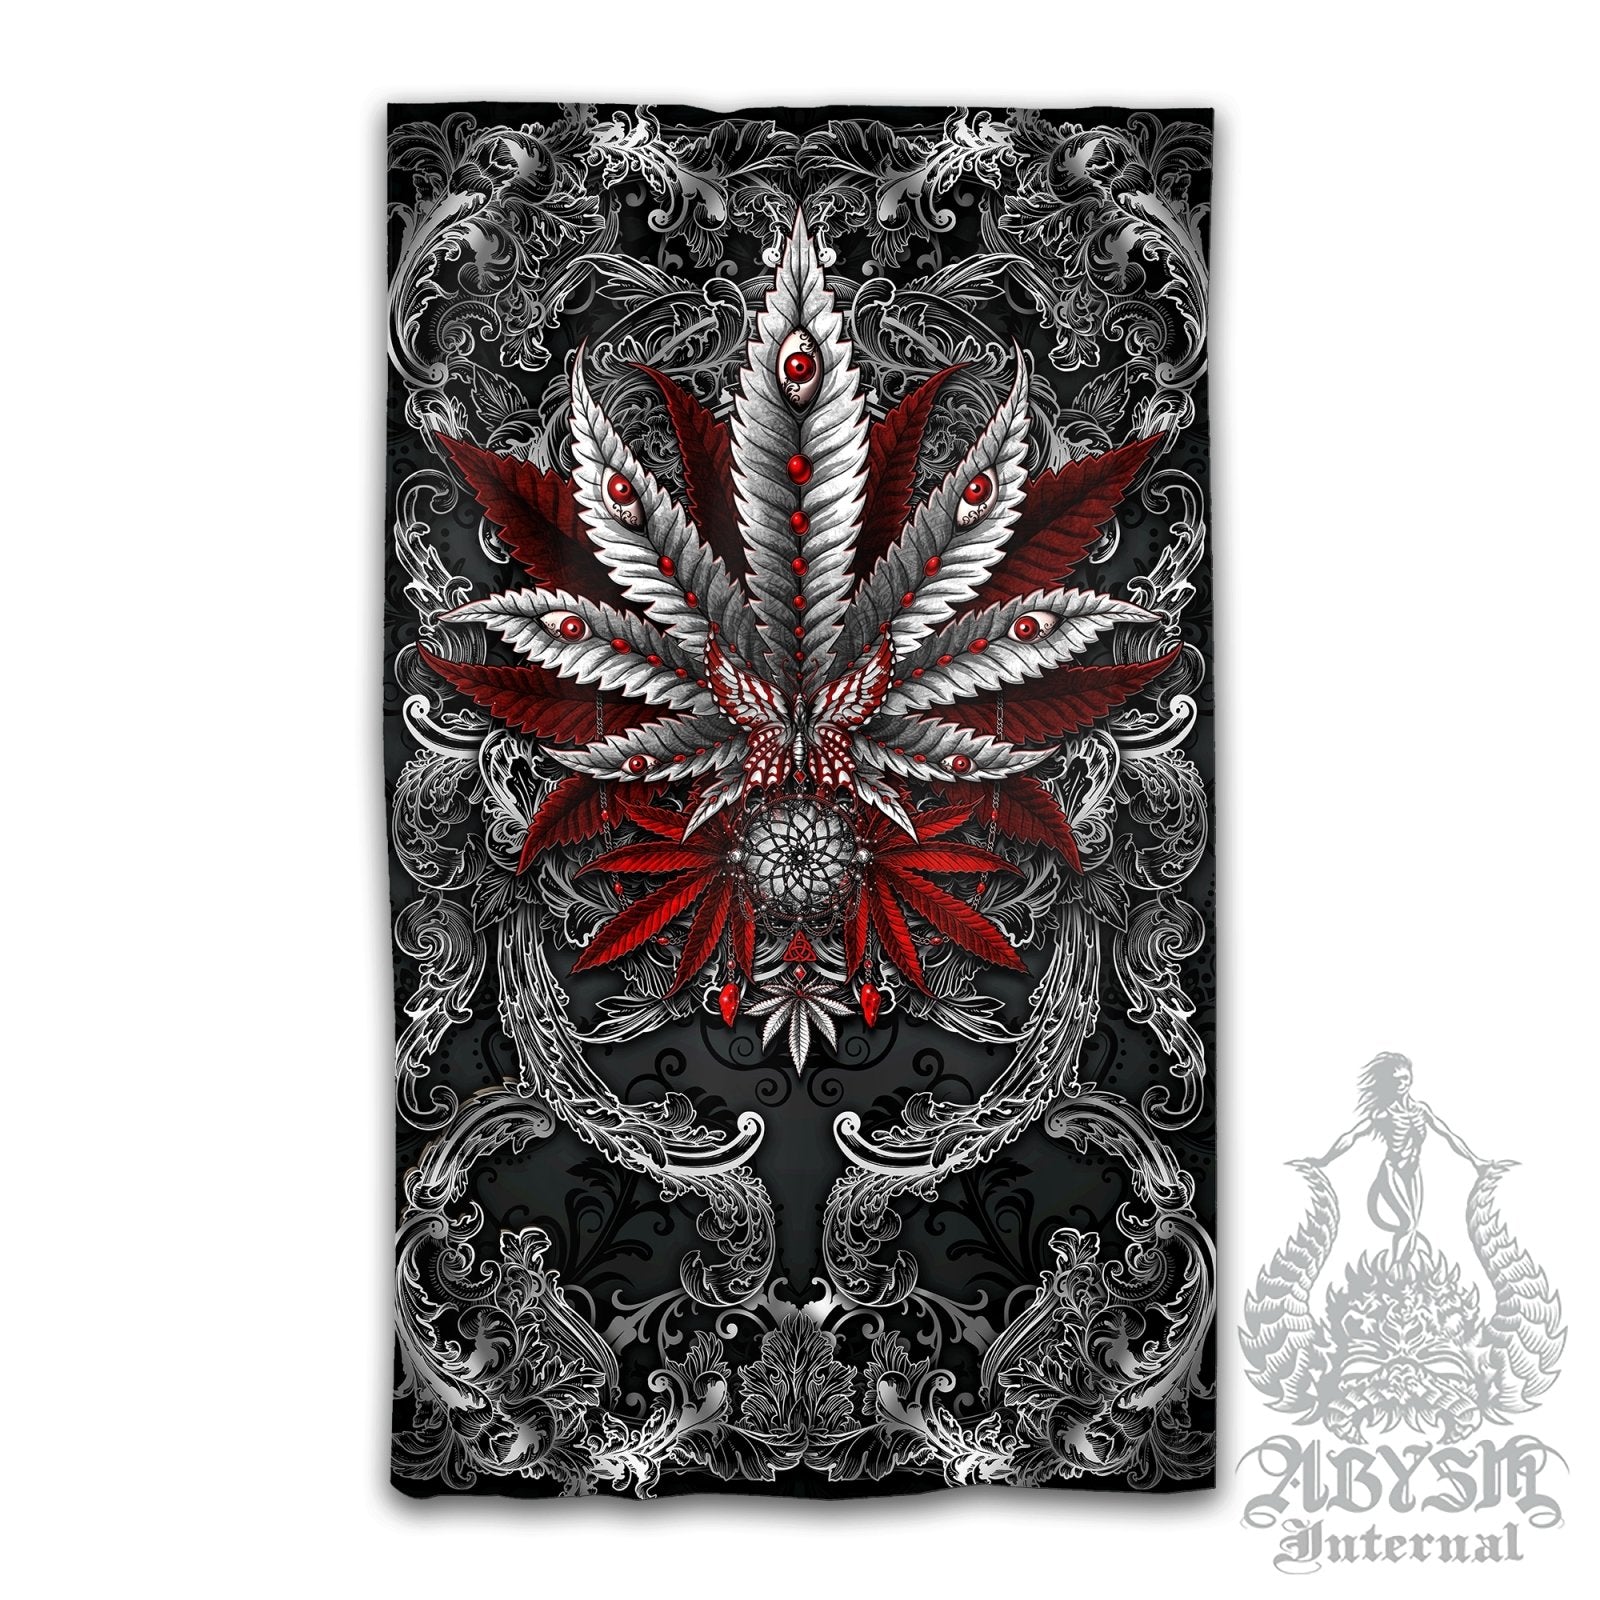 Gothic Weed Blackout Curtains, Cannabis Home and Shop Decor, Long Window Panels, Indie 420 Room Art Print - Dark - Abysm Internal